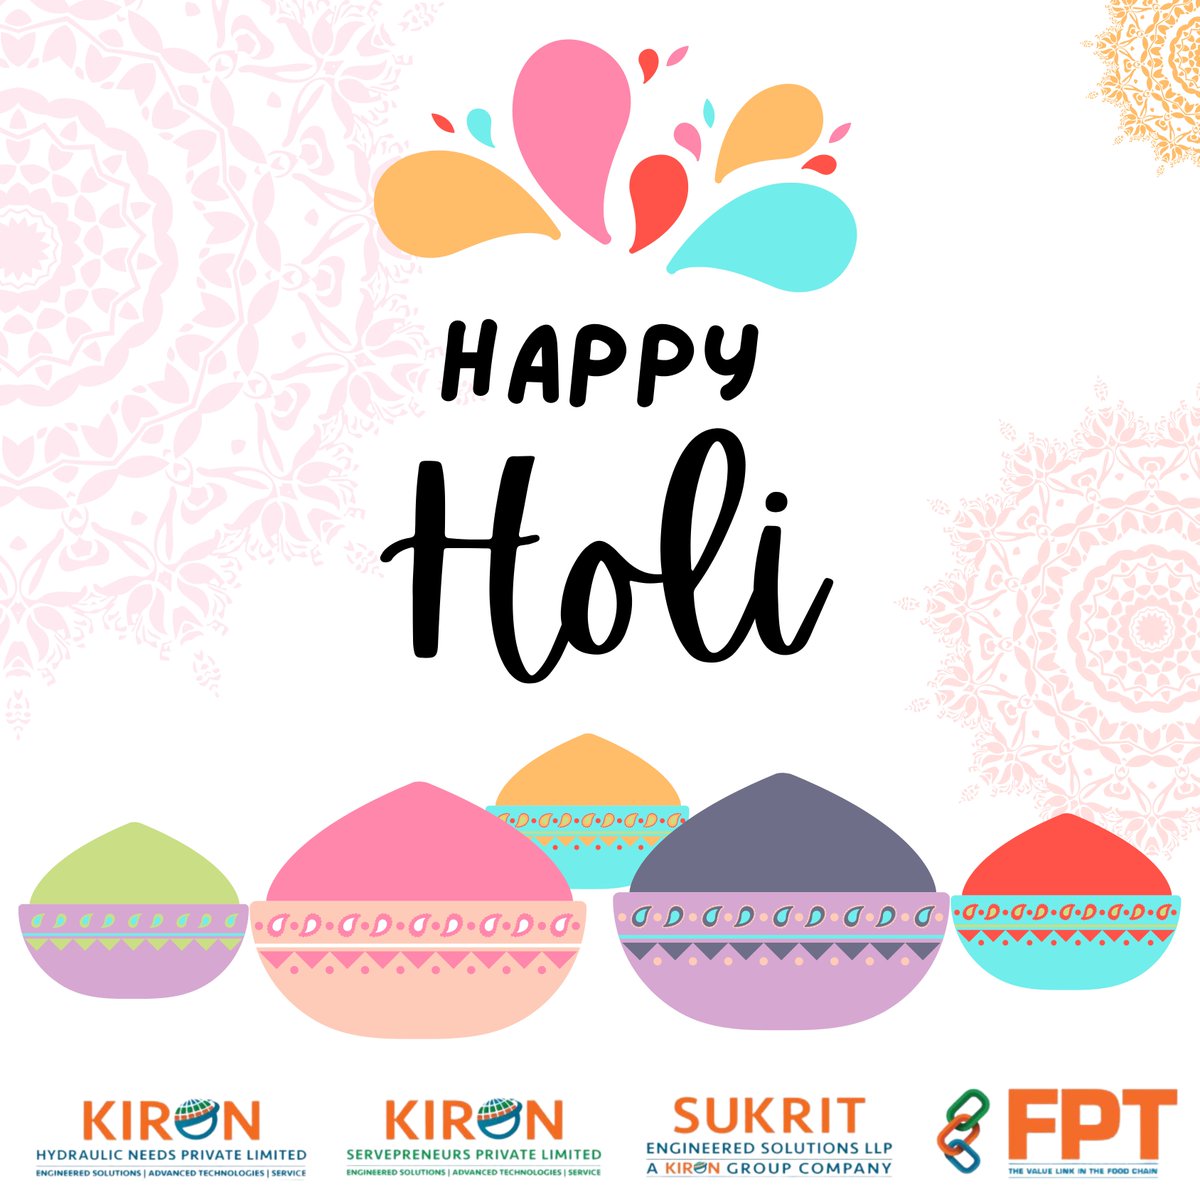 The team at Kiron Hydraulic Needs wishes you all a Happy Holi 2024! May this festival of colours bring joy, prosperity, and vibrant energy to your lives.

#celebration #happyholi #festivalofcolors #holifestival #colors